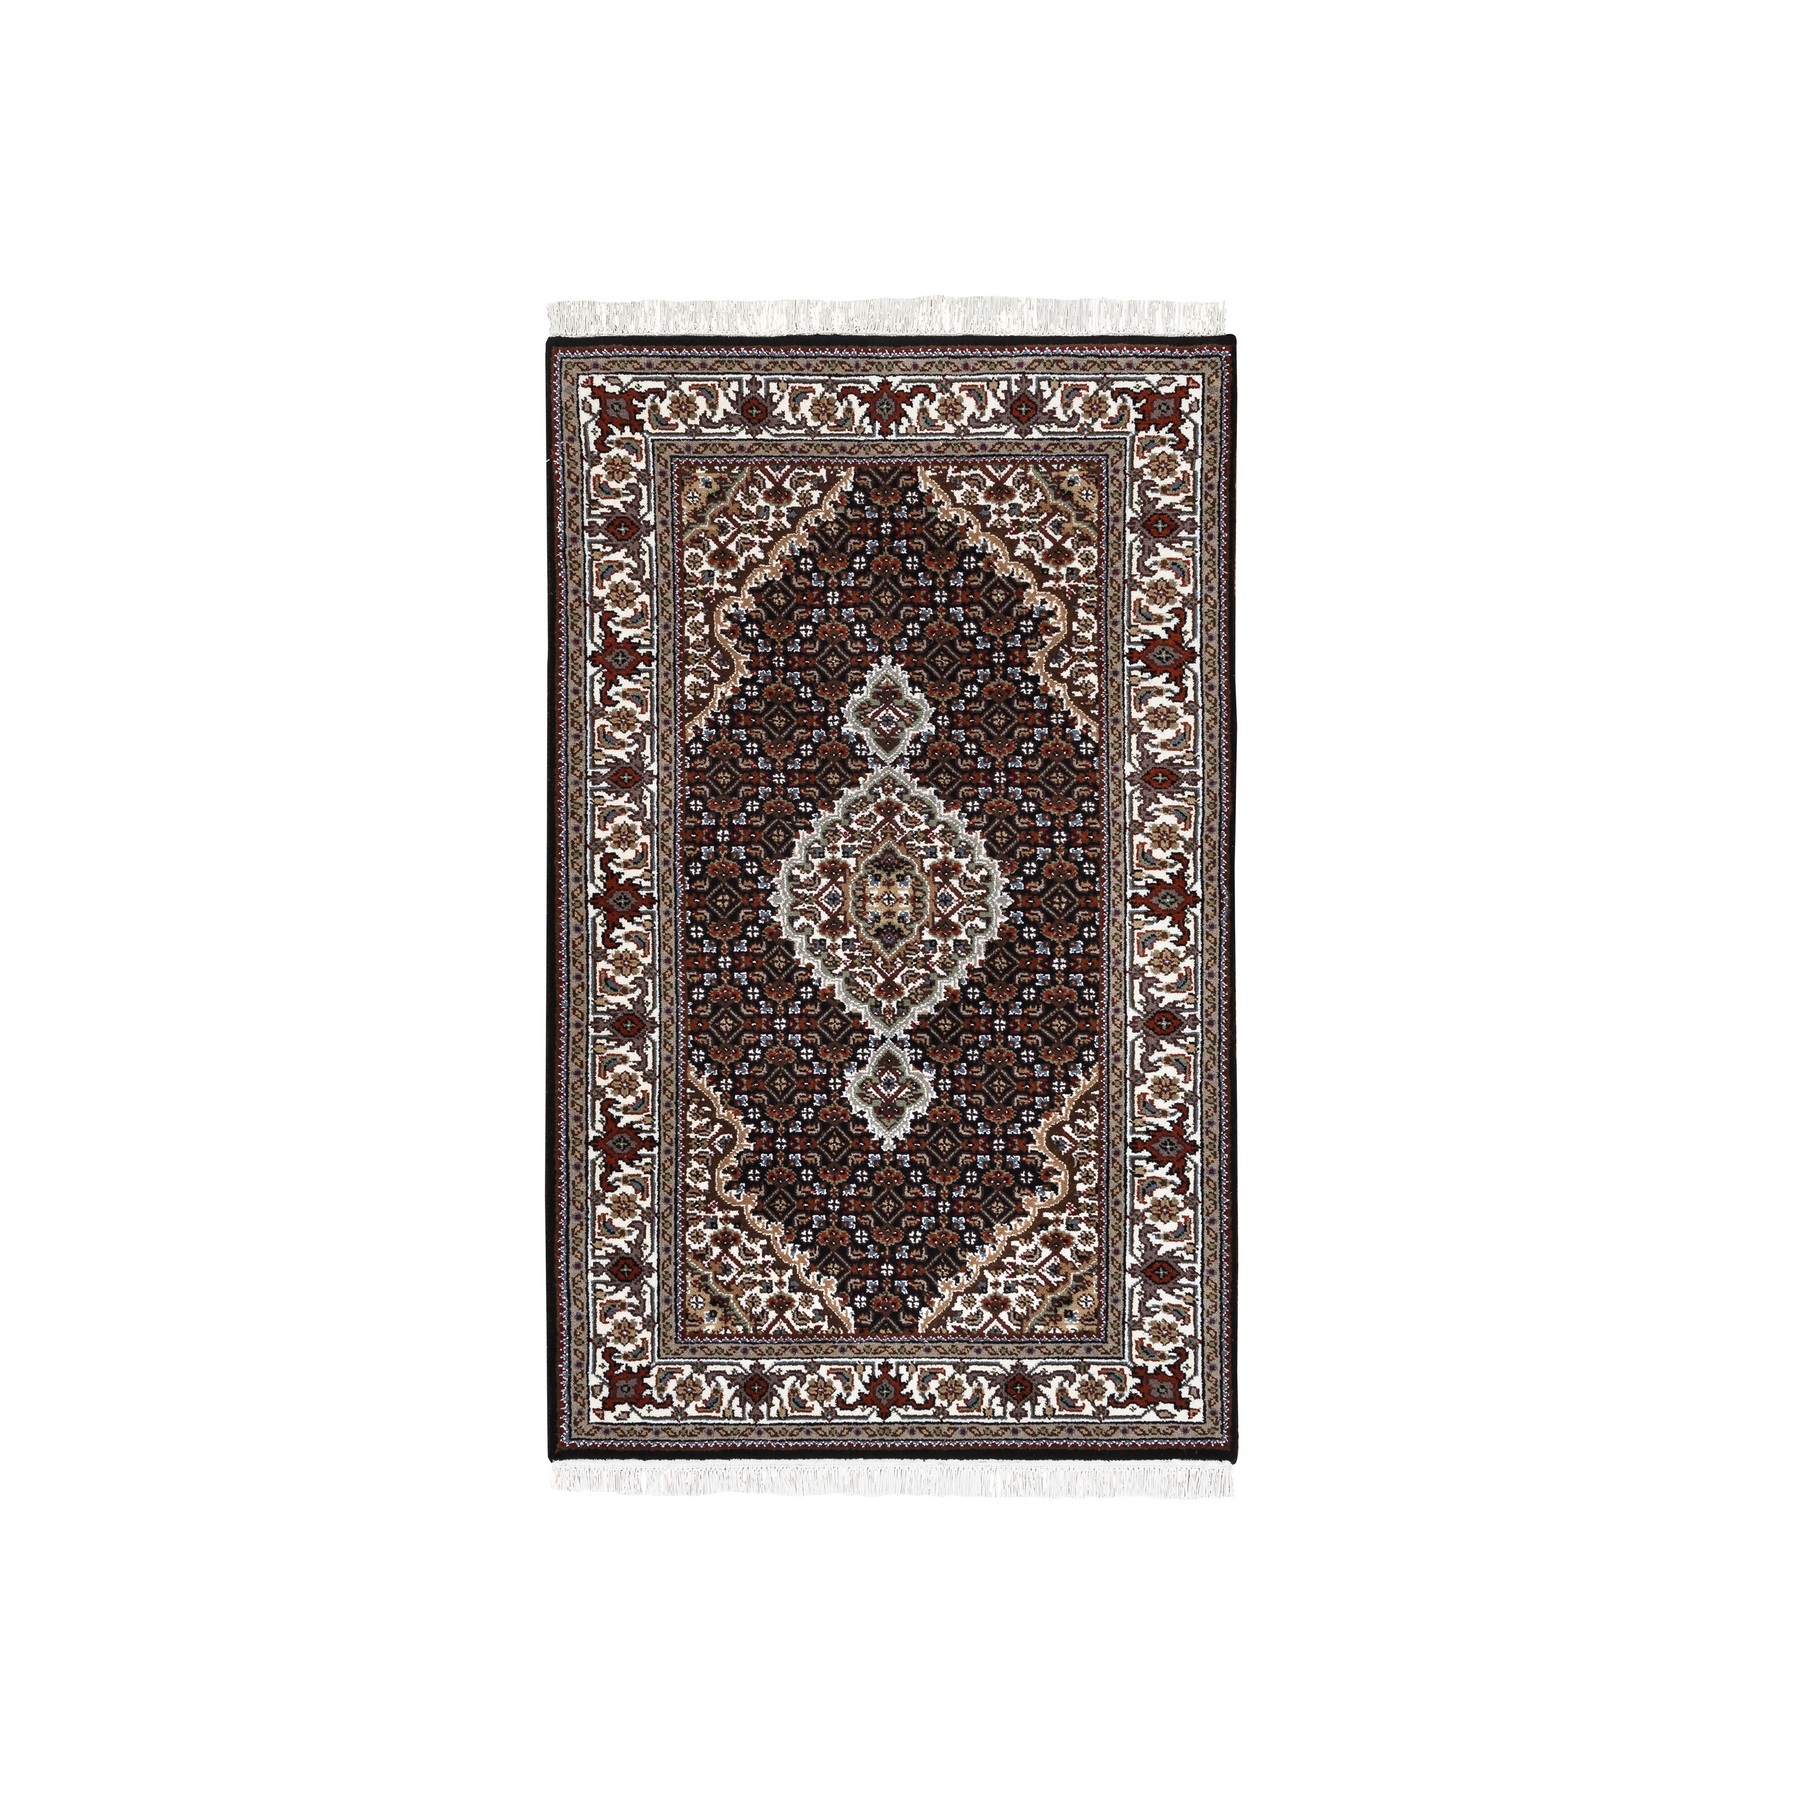 Pirniakan Collection Hand Knotted Black Rug No: 1124964